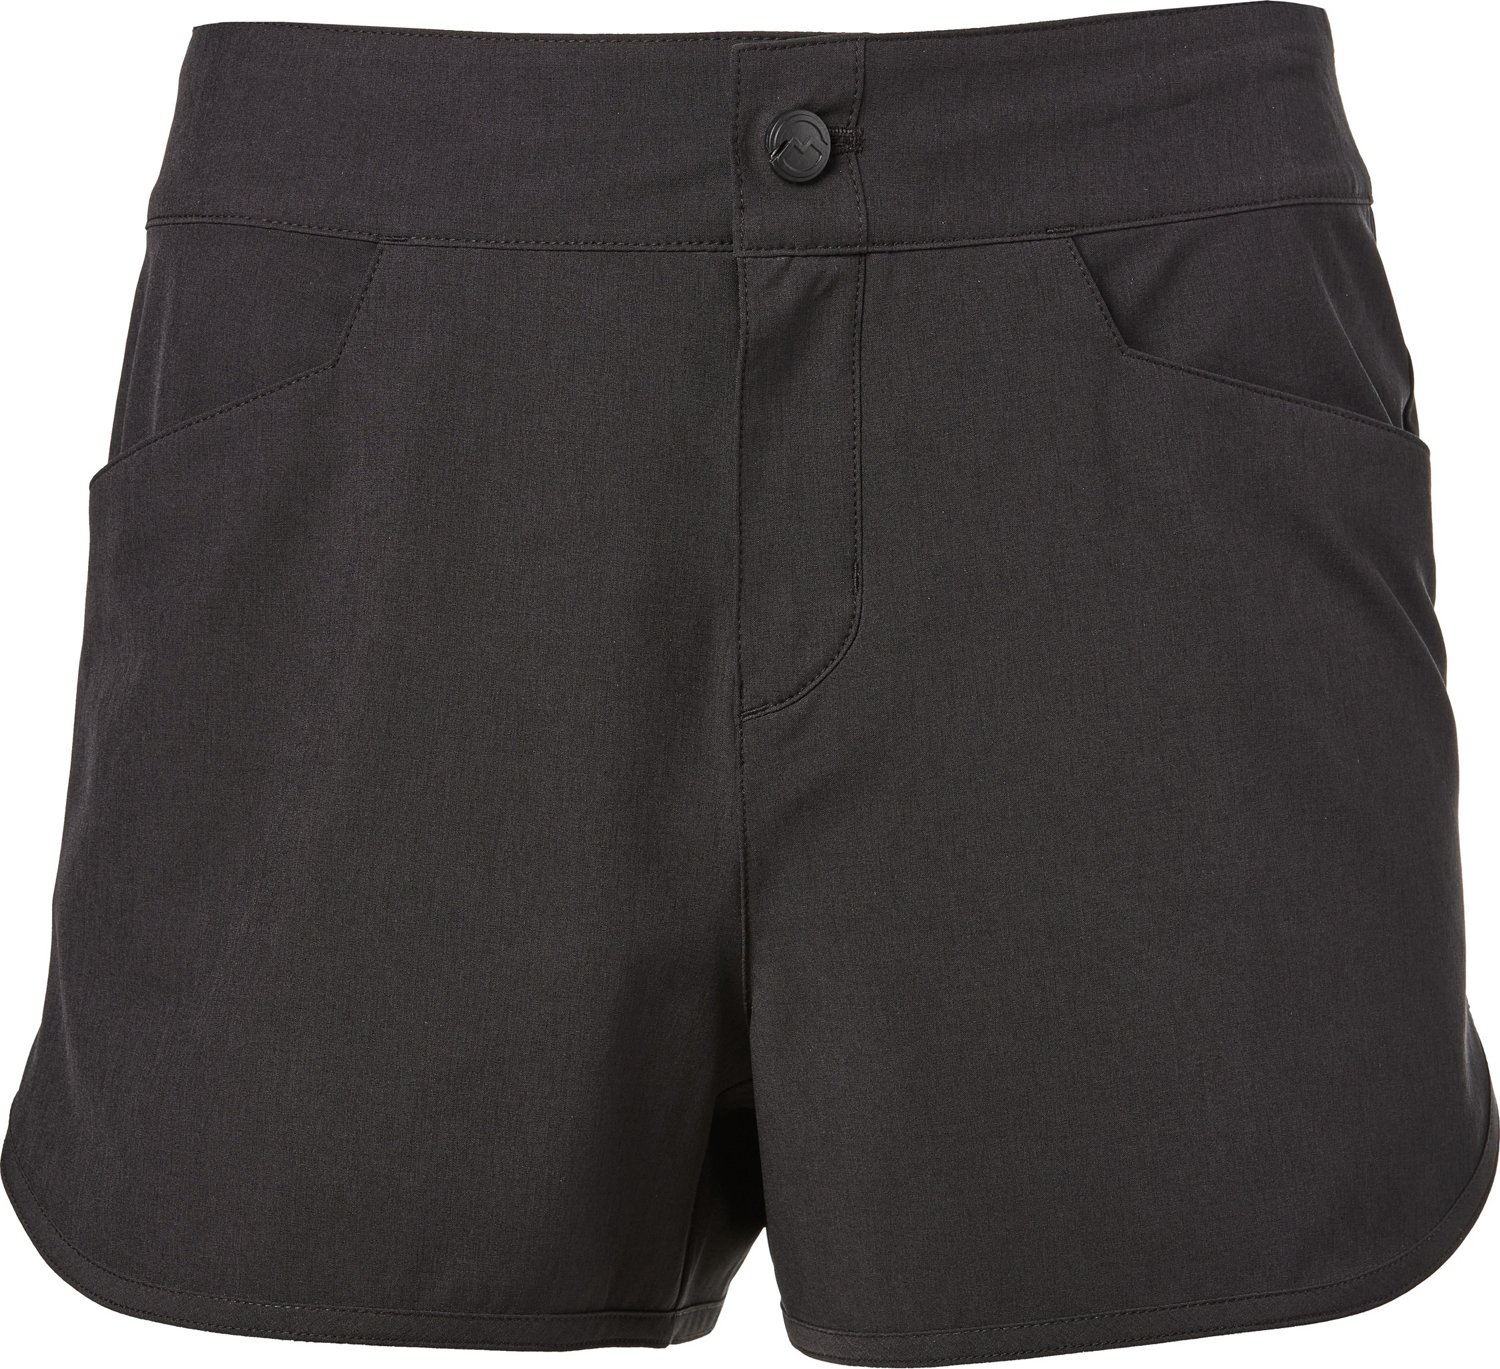 Magellan Outdoors Women's Pro Fish Technical Shorties                                                                            - view number 1 selected